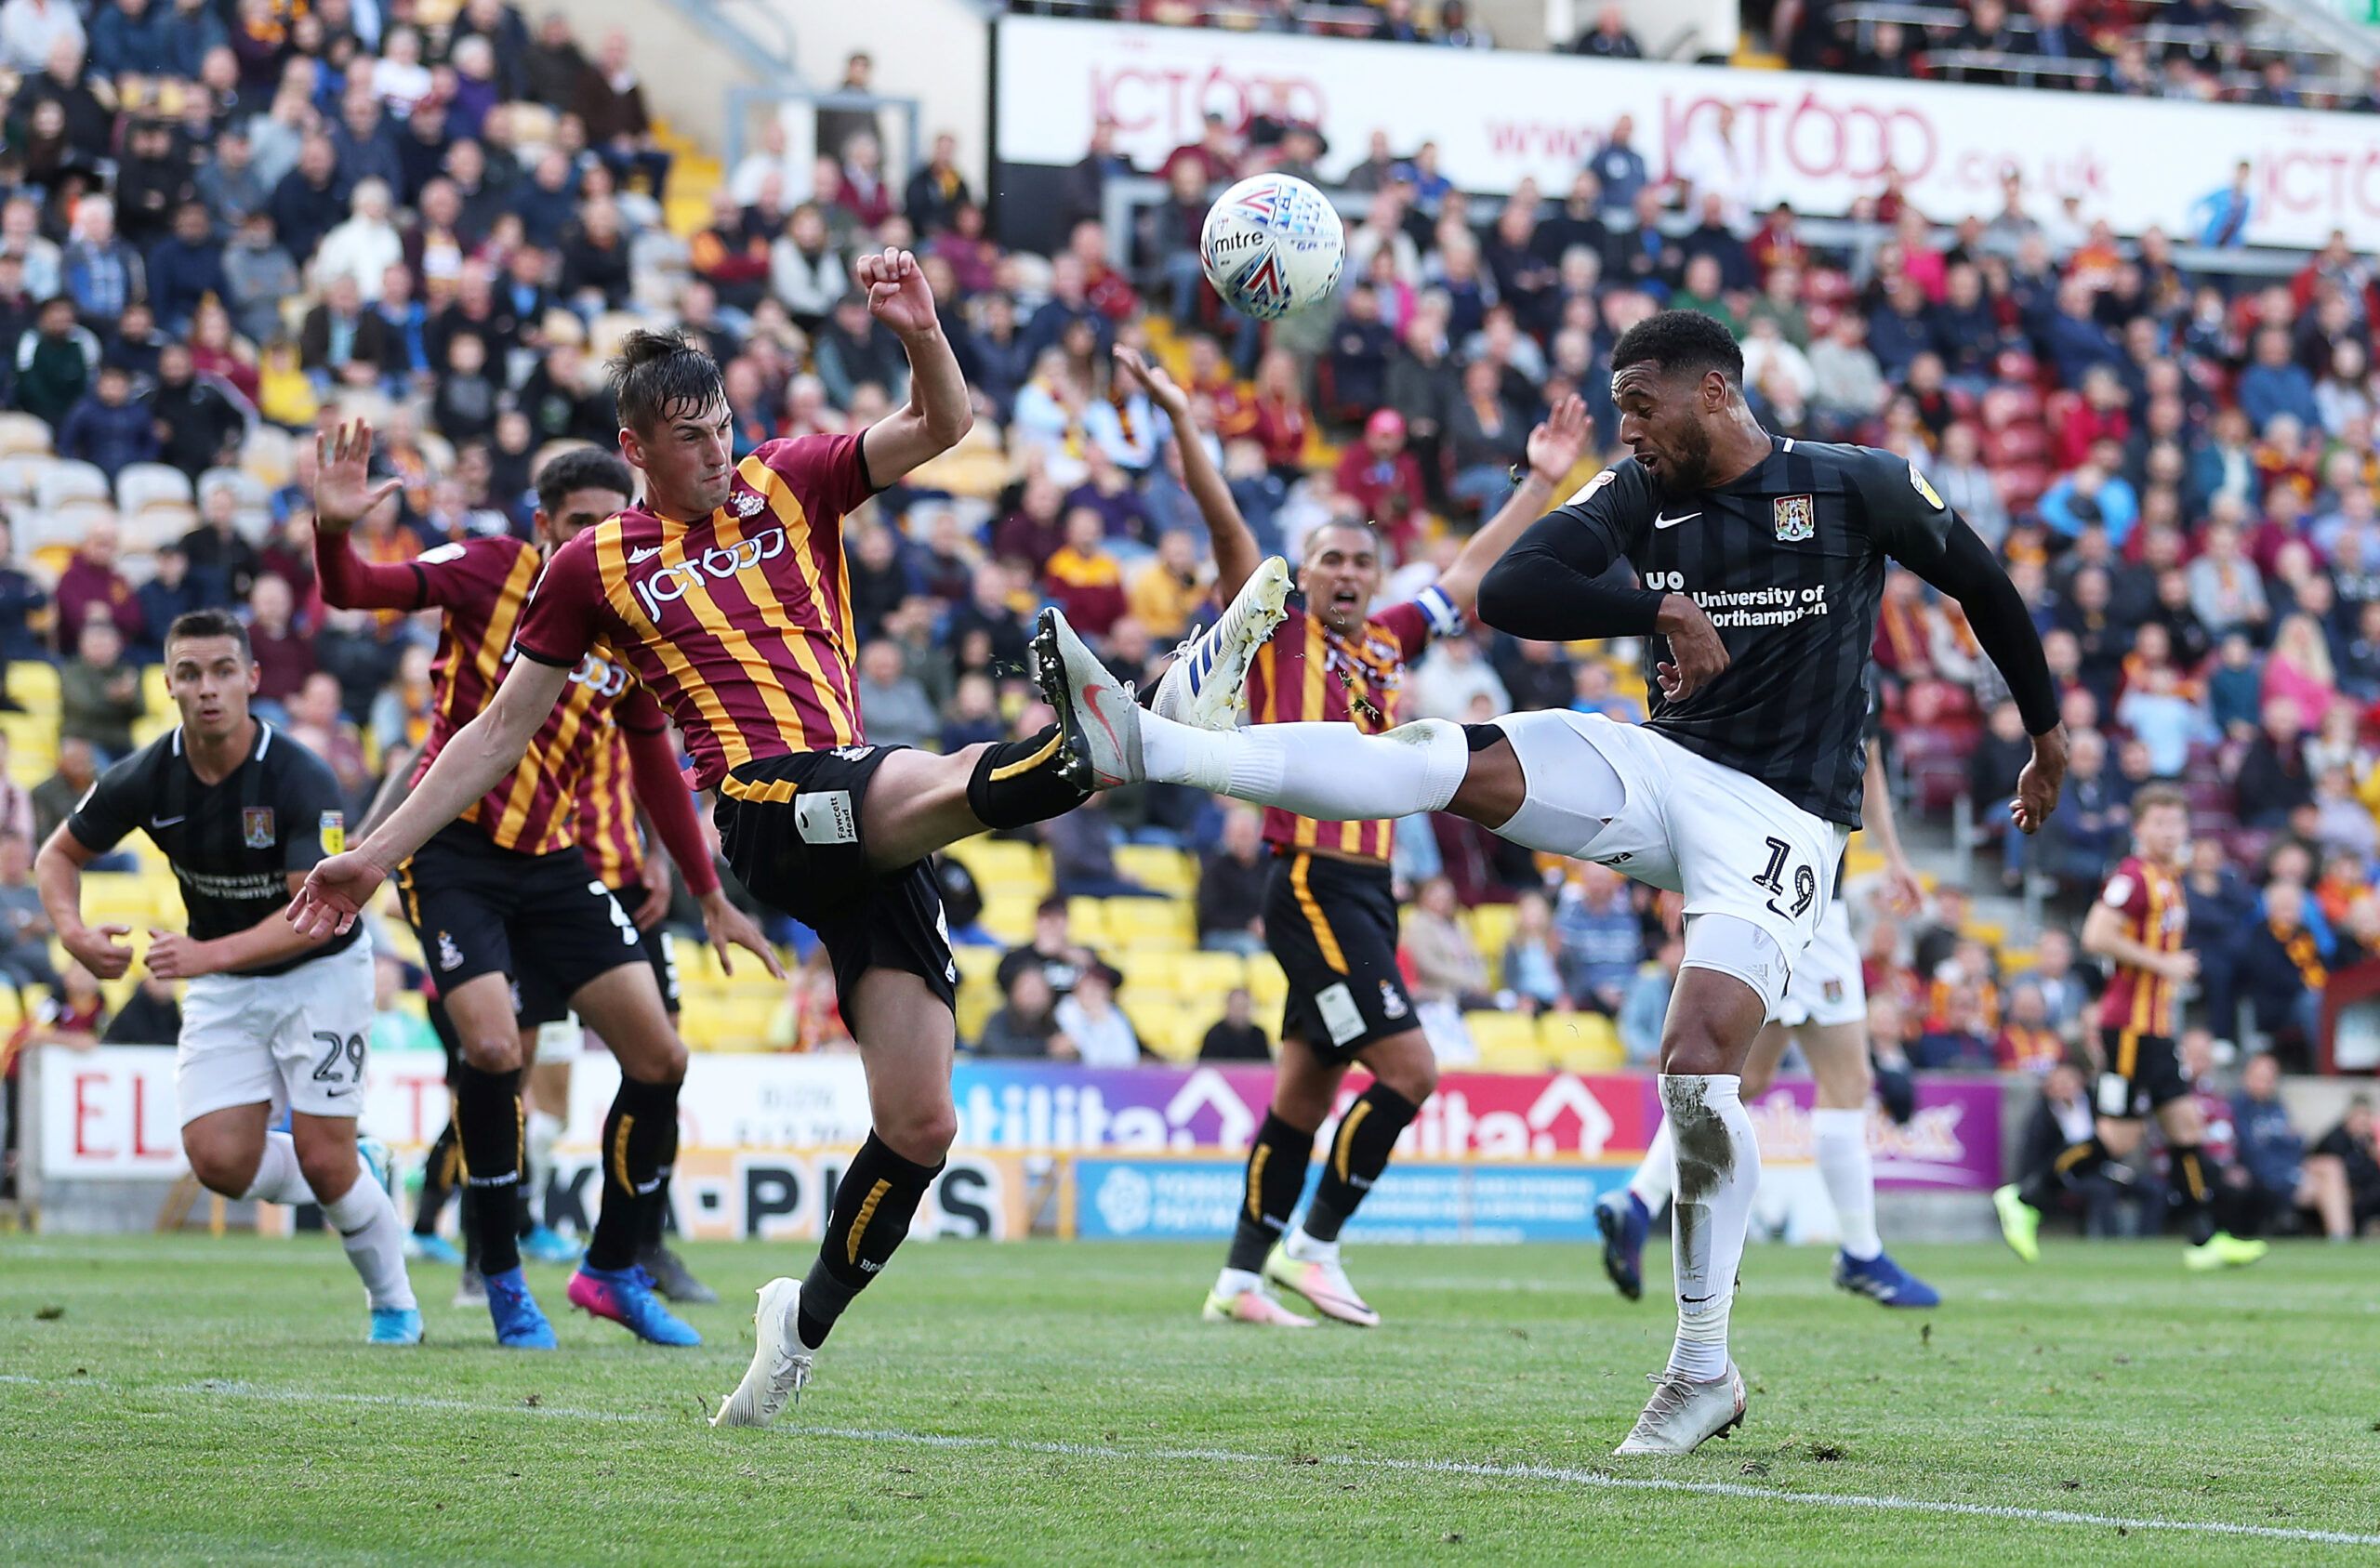 Soccer Football - League Two - Bradford City v Northampton Town - Northern Commercials Stadium, Bradford, Britain - September 7, 2019   Bradford City's Paudie O'Connor in action with Northampton Town's Vadaine Oliver   Action Images/John Clifton    EDITORIAL USE ONLY. No use with unauthorized audio, video, data, fixture lists, club/league logos or 